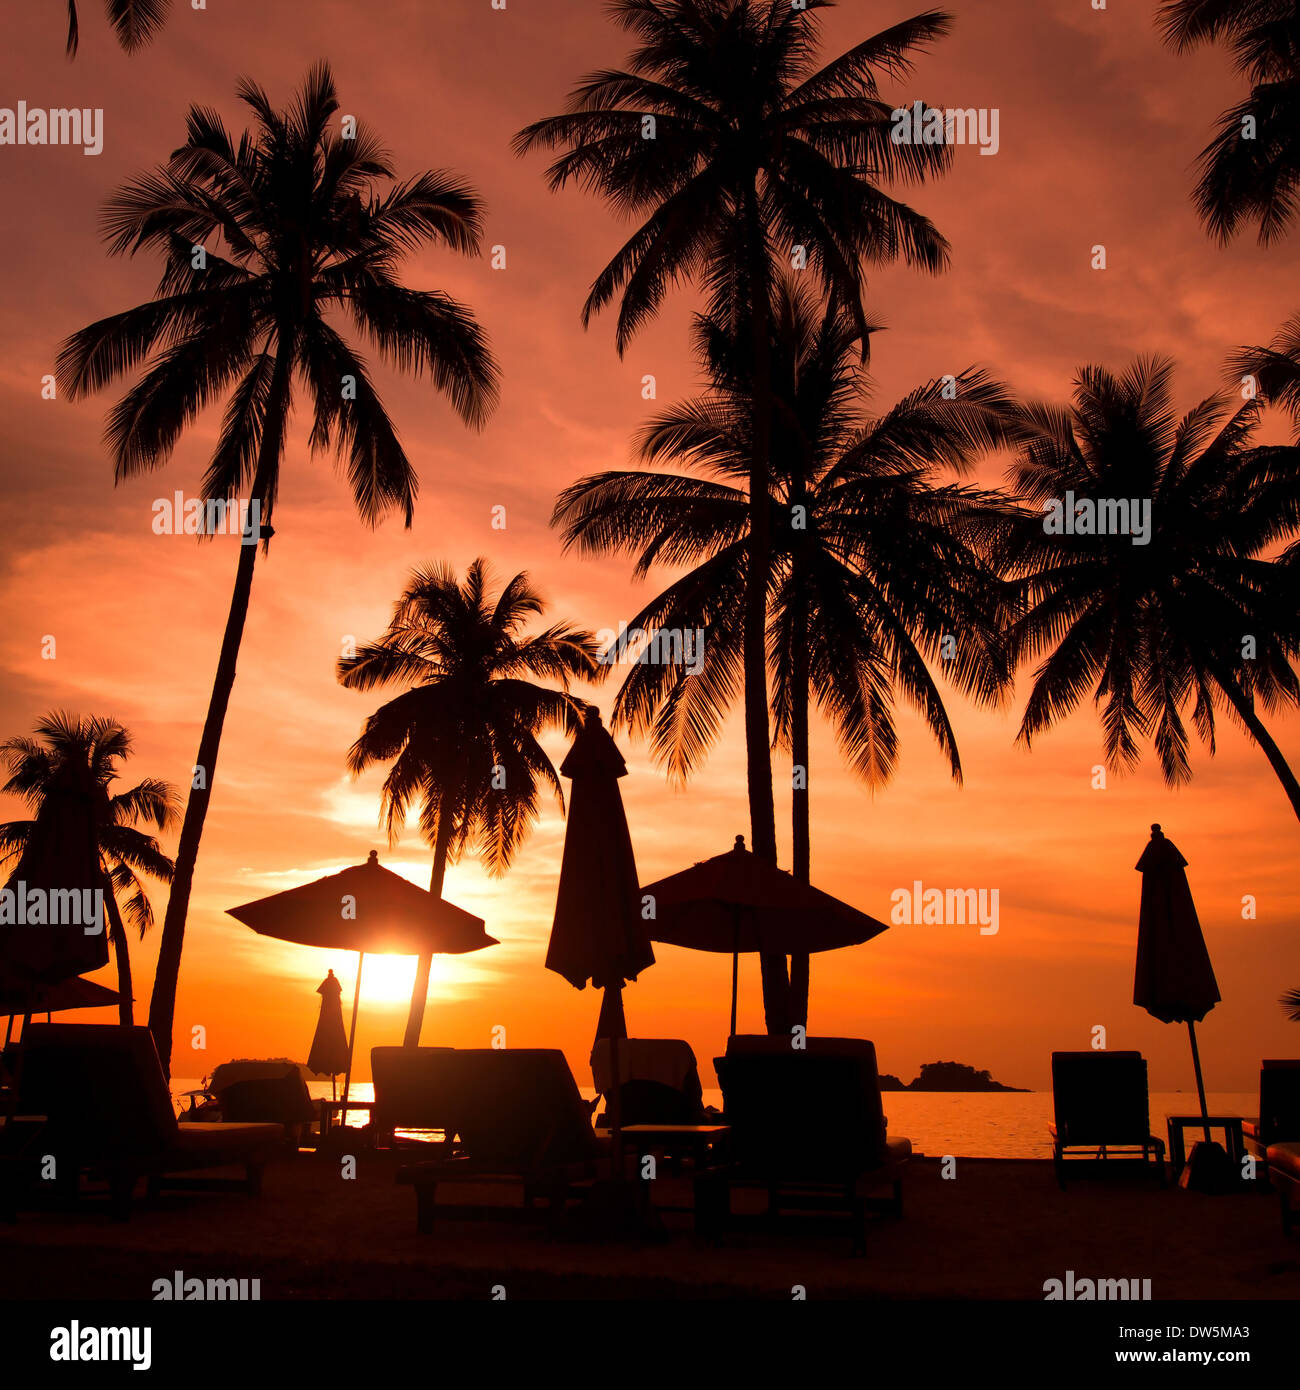 beautiful beach resort with palm trees at sunset Stock Photo